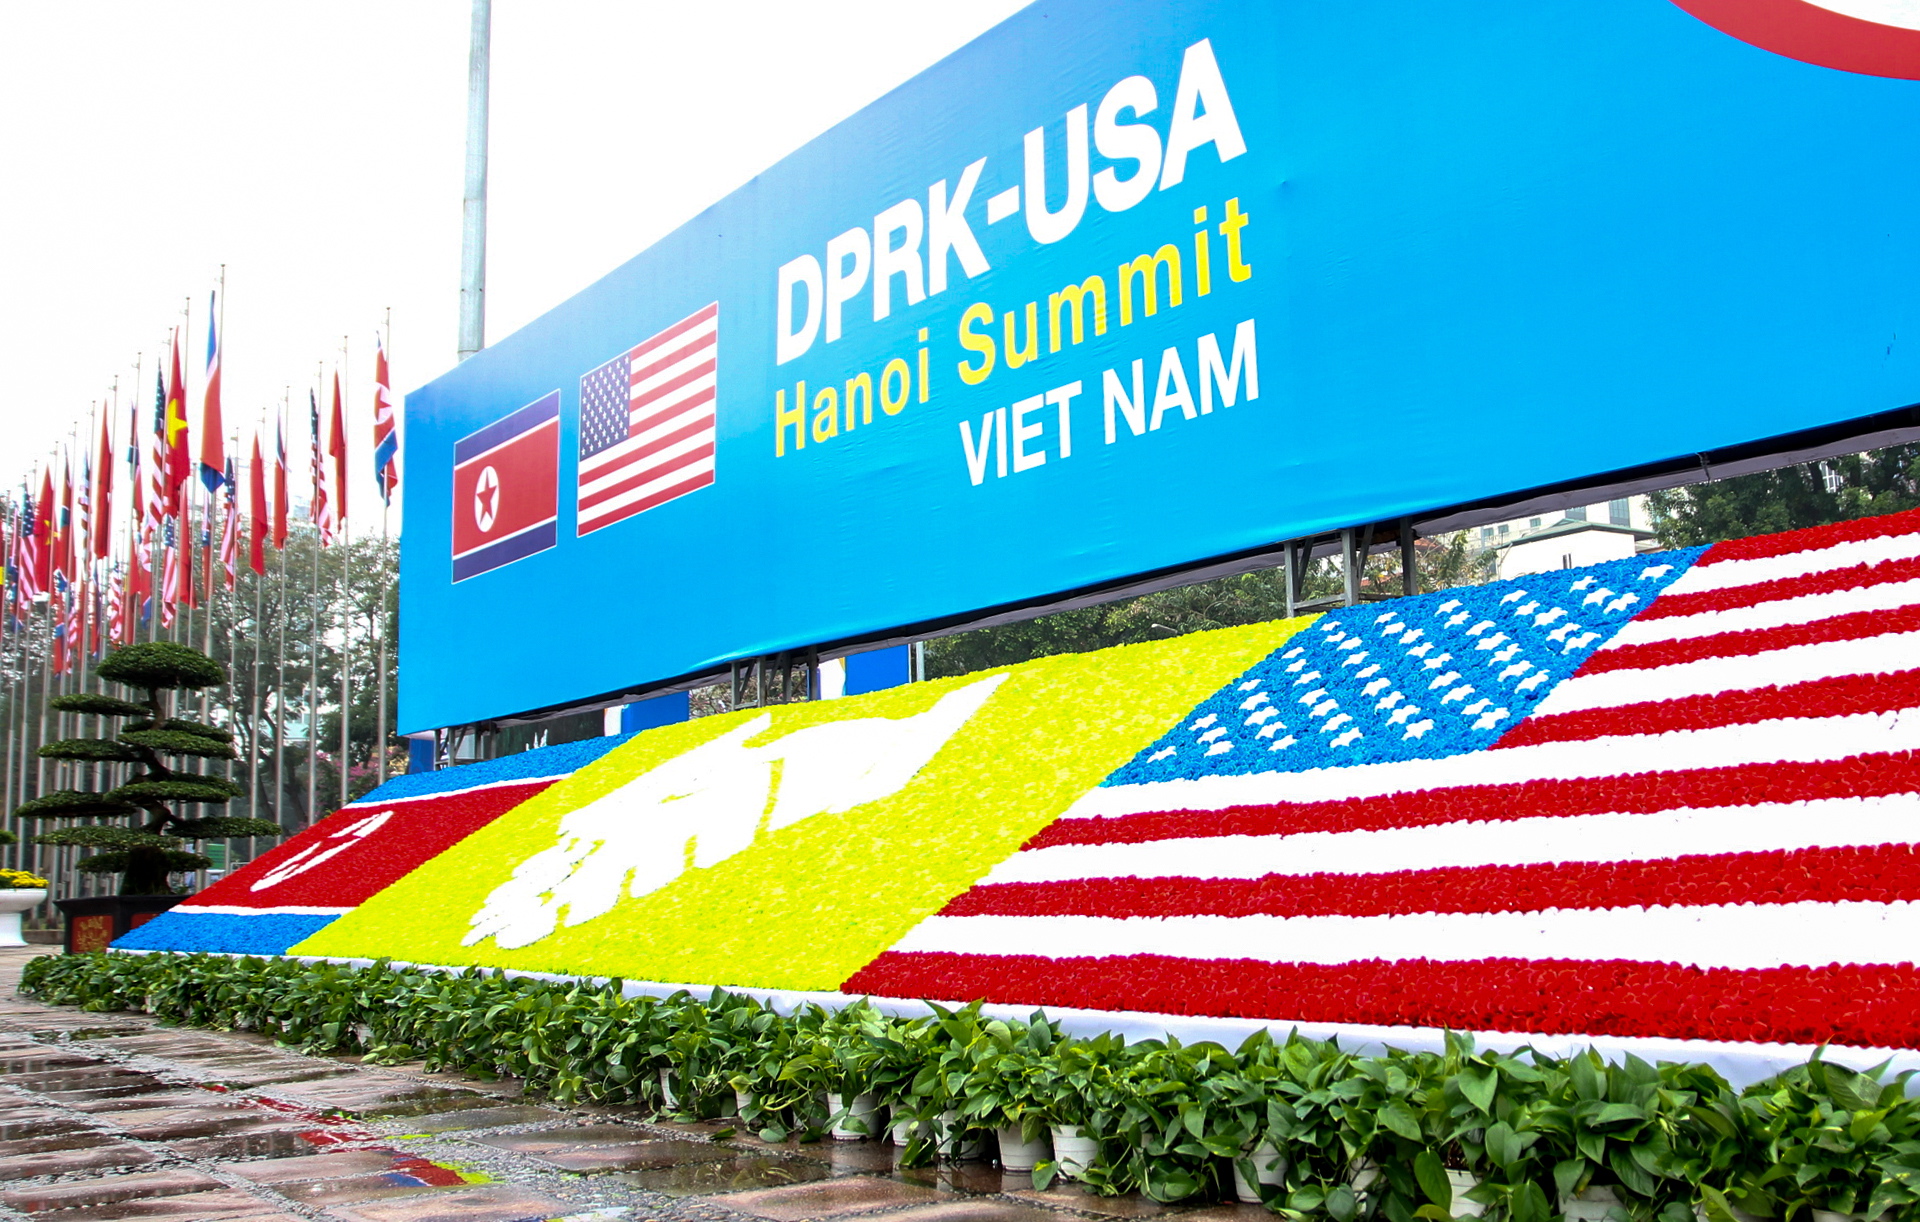 An informational banner on the eve of the 2019 North Korea-United States Summit between North Korean leader Kim Jong Un and US President Donald Trump in Hanoi, Vietnam.